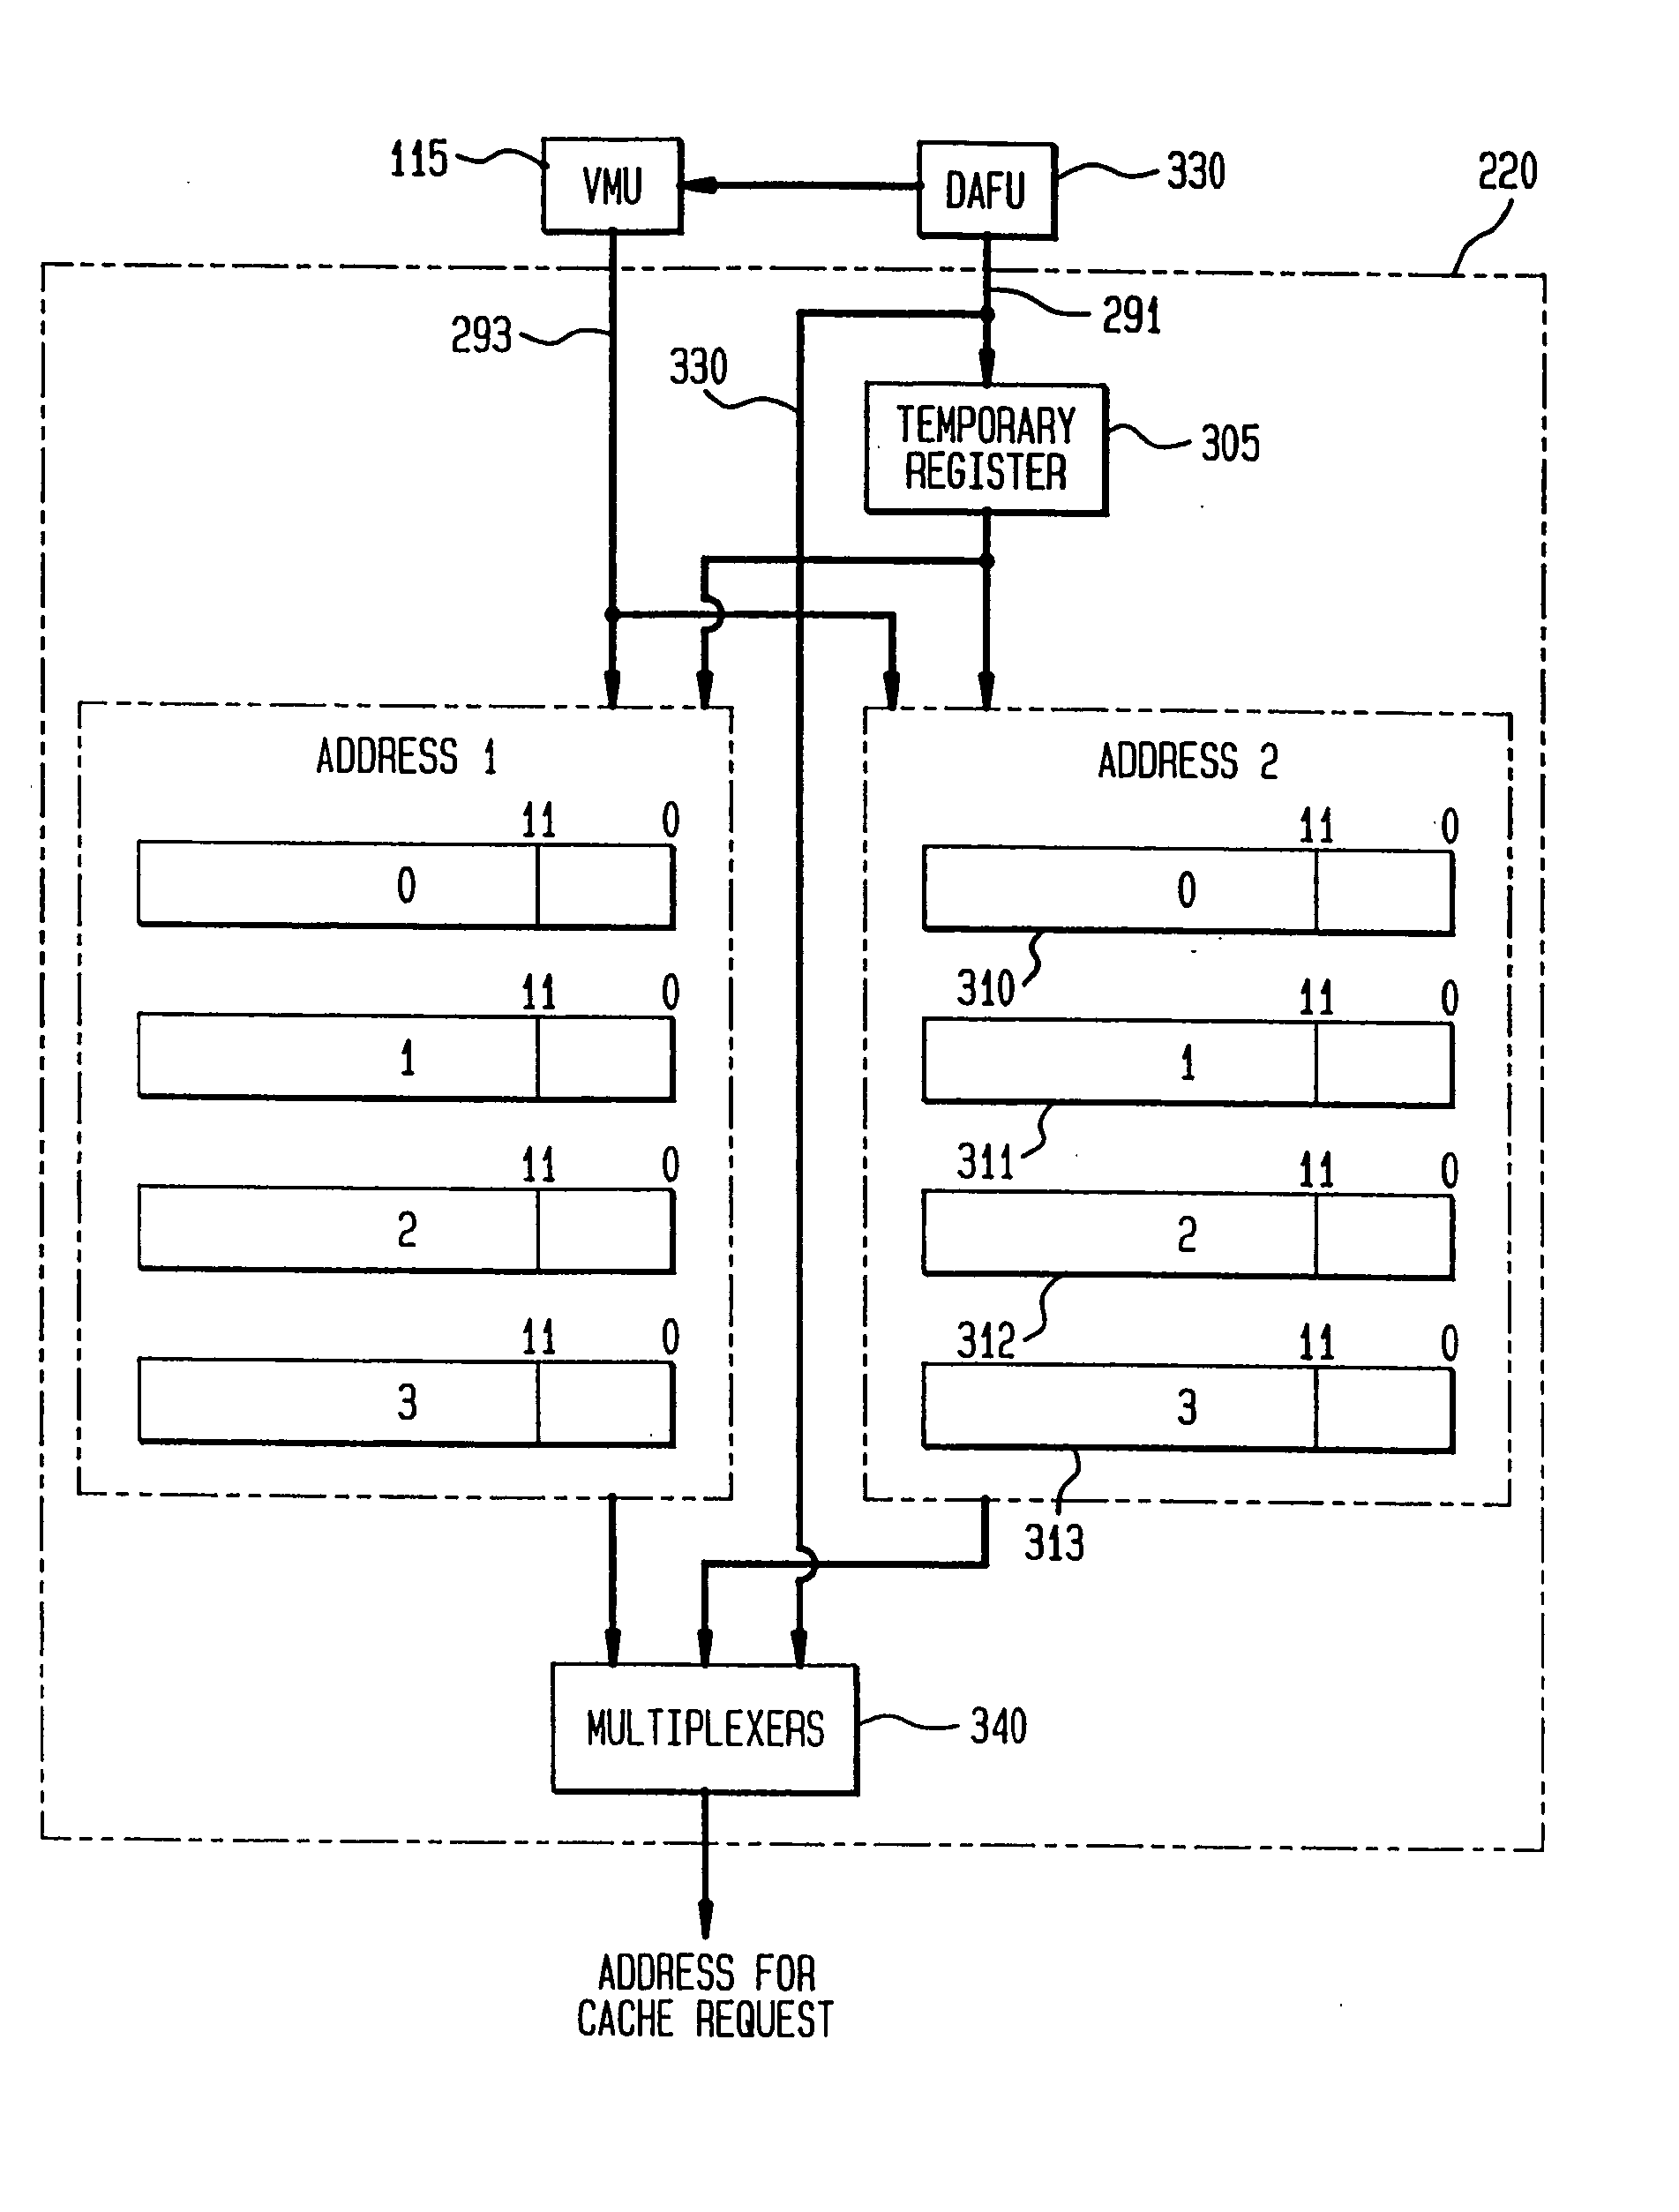 System and method for handling load and/or store operations an a supperscalar microprocessor